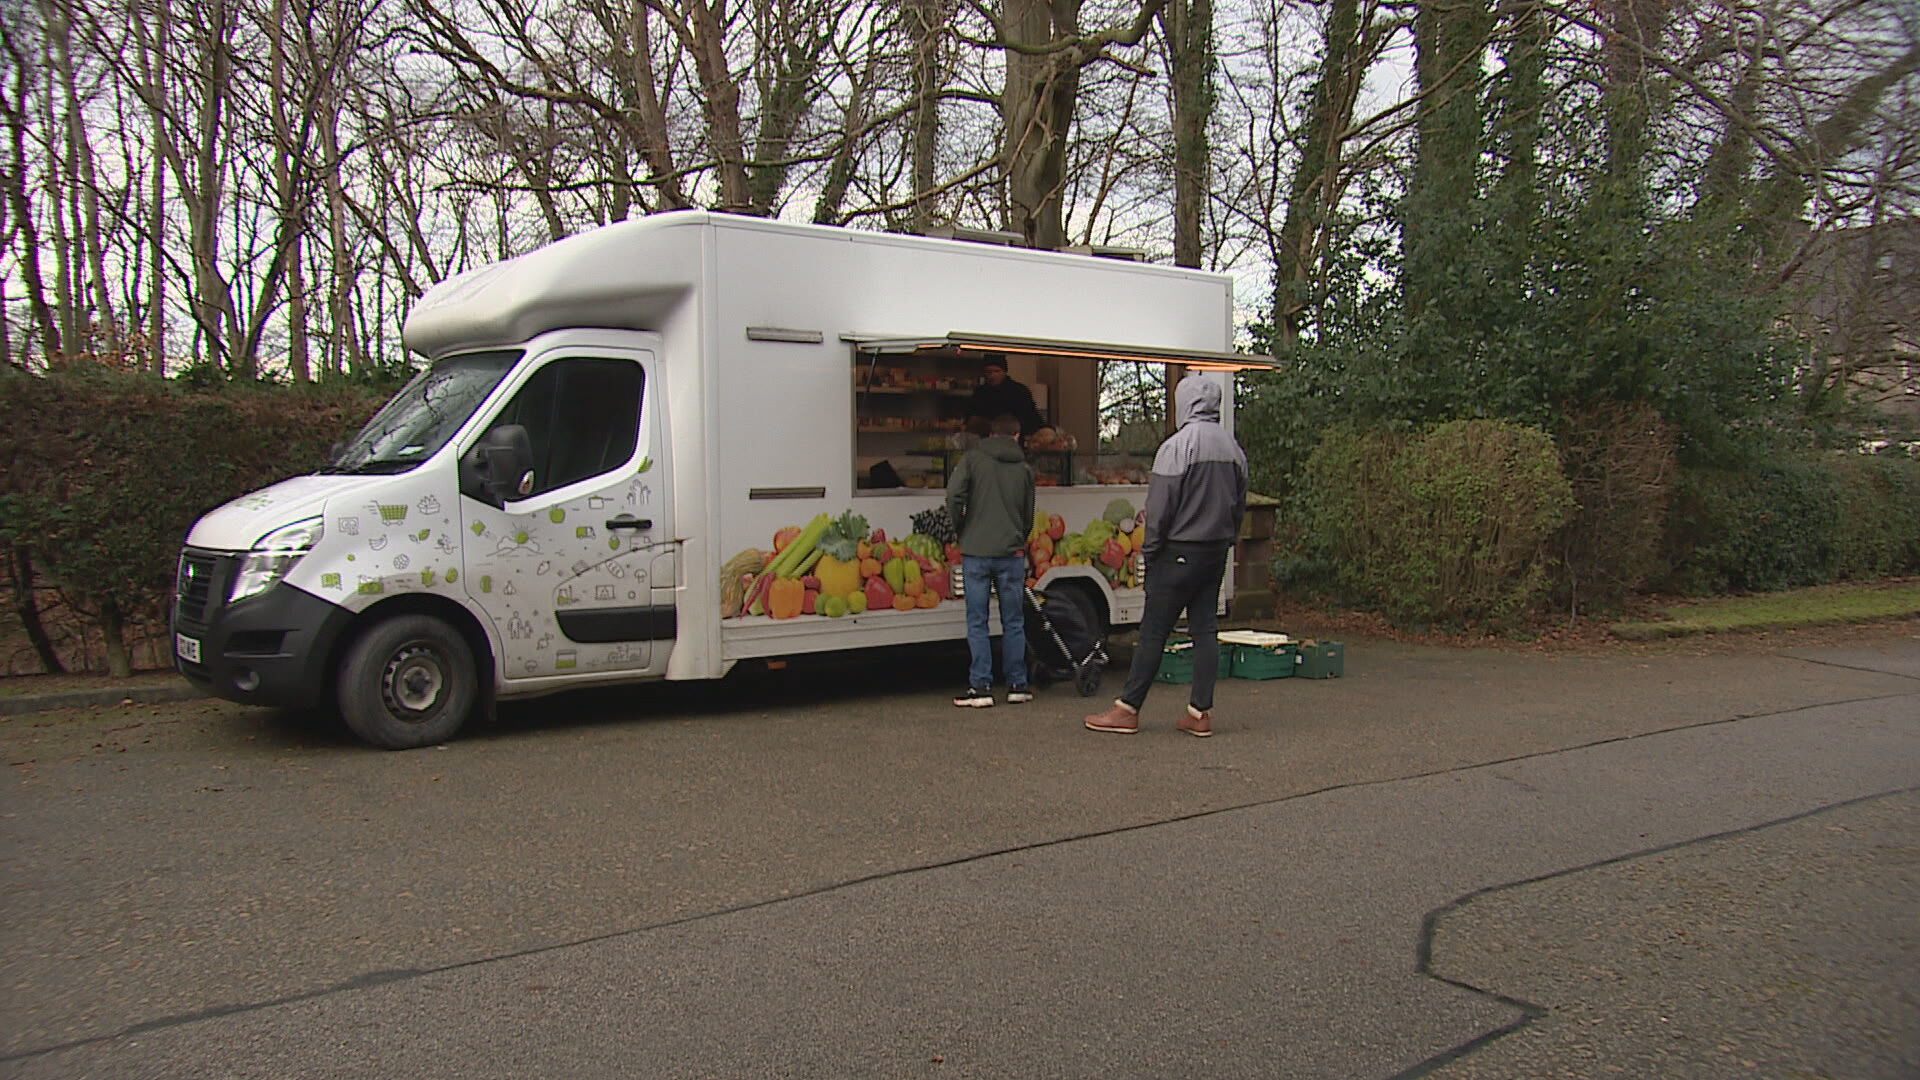 The food support van was described as a 